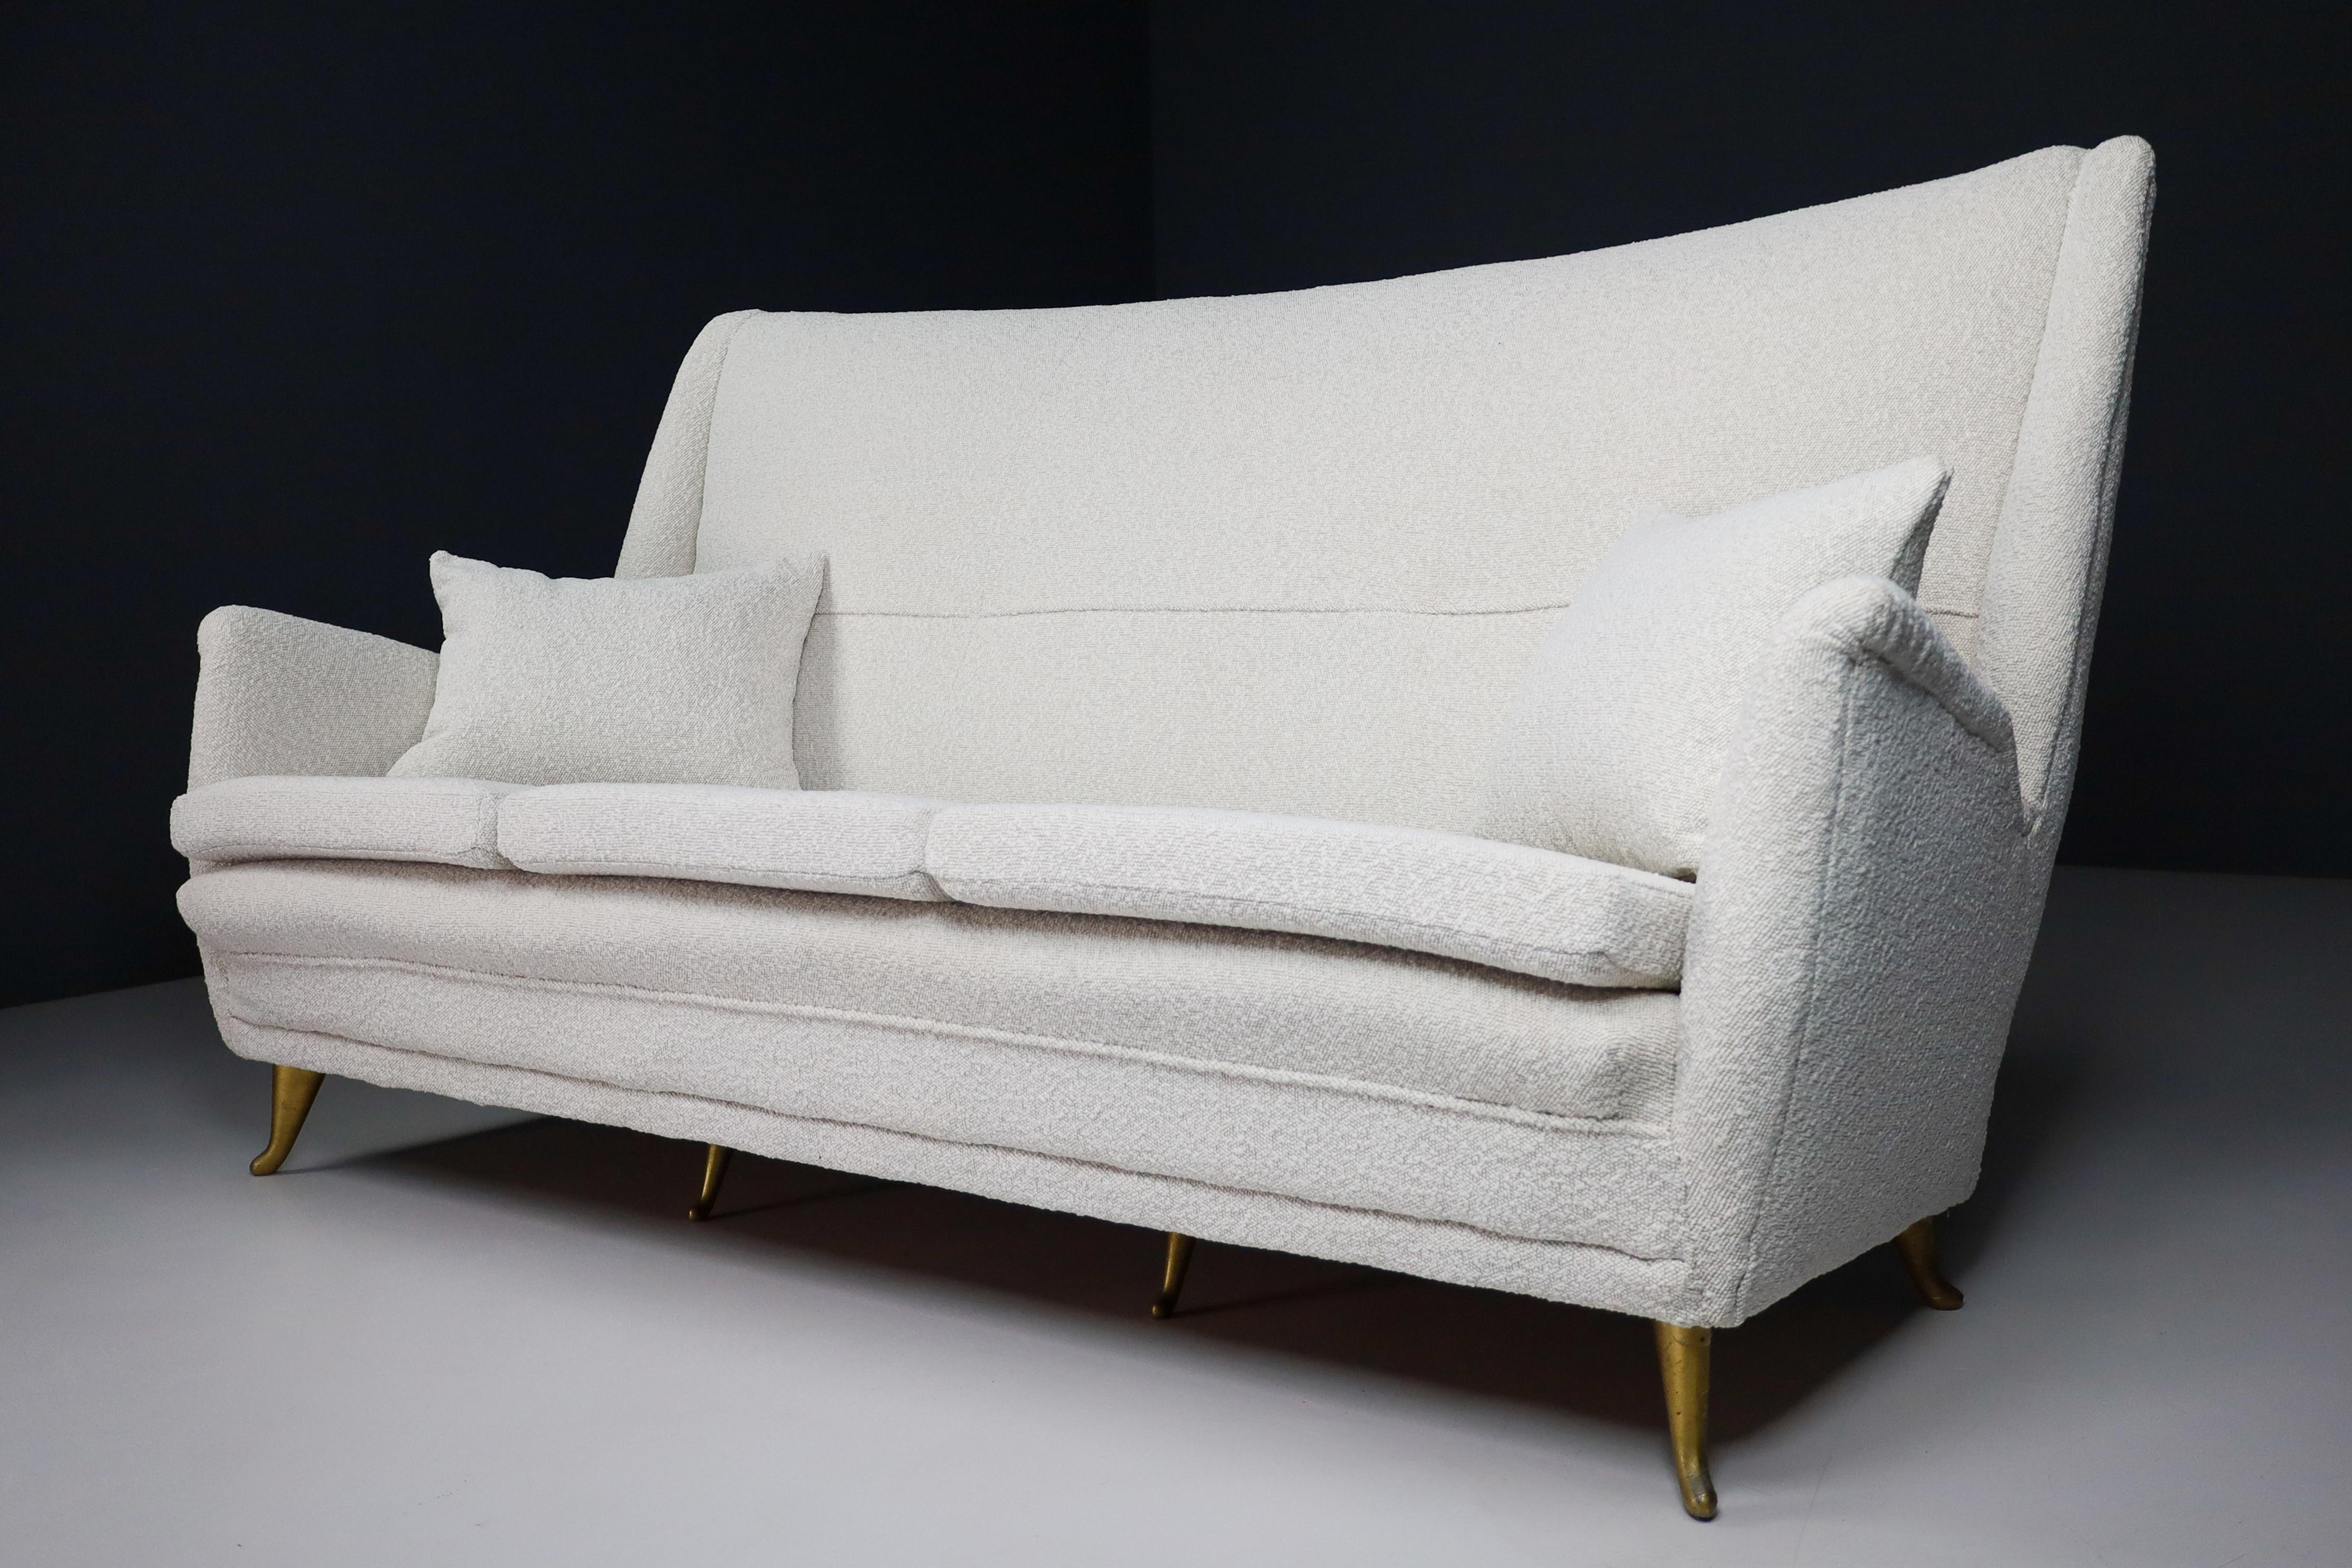 Mid-Century Modern High Back Sofa By Gio Ponti For ISA Bergamo in Bouclé Fabric Upholstery 1950s For Sale